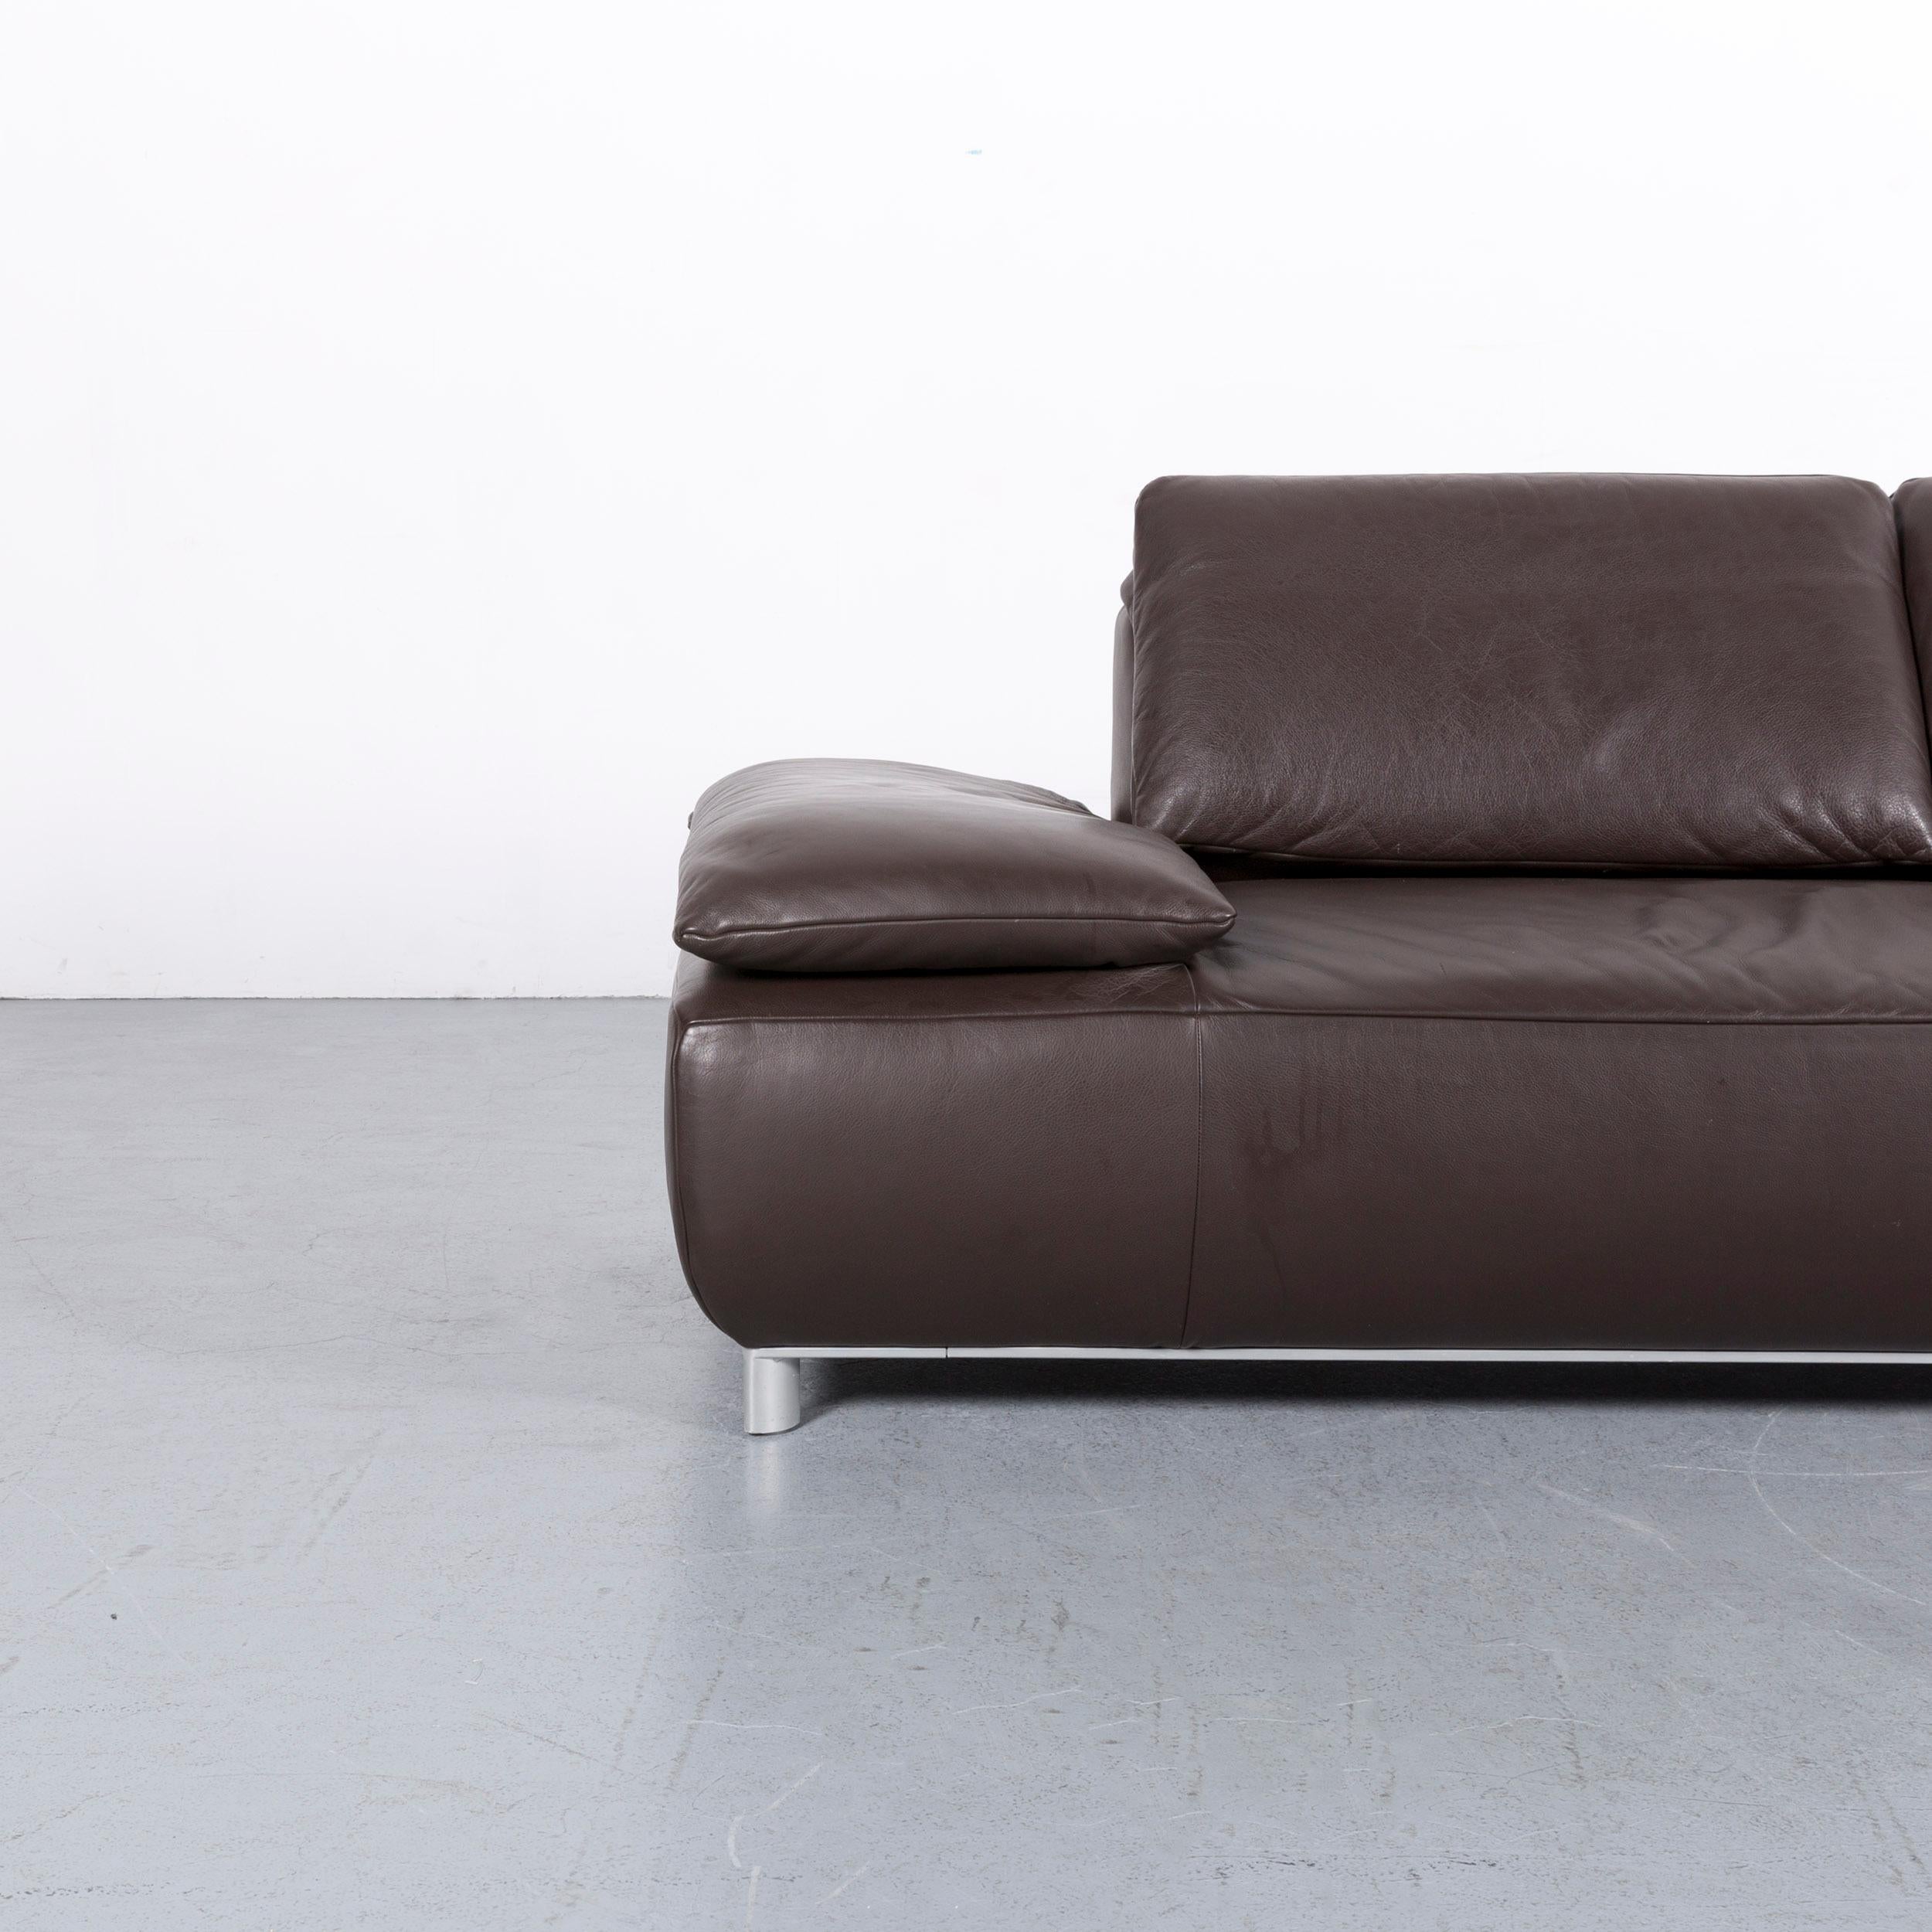 We bring to you an Koinor Volare leather sofa brown three-seat couch.